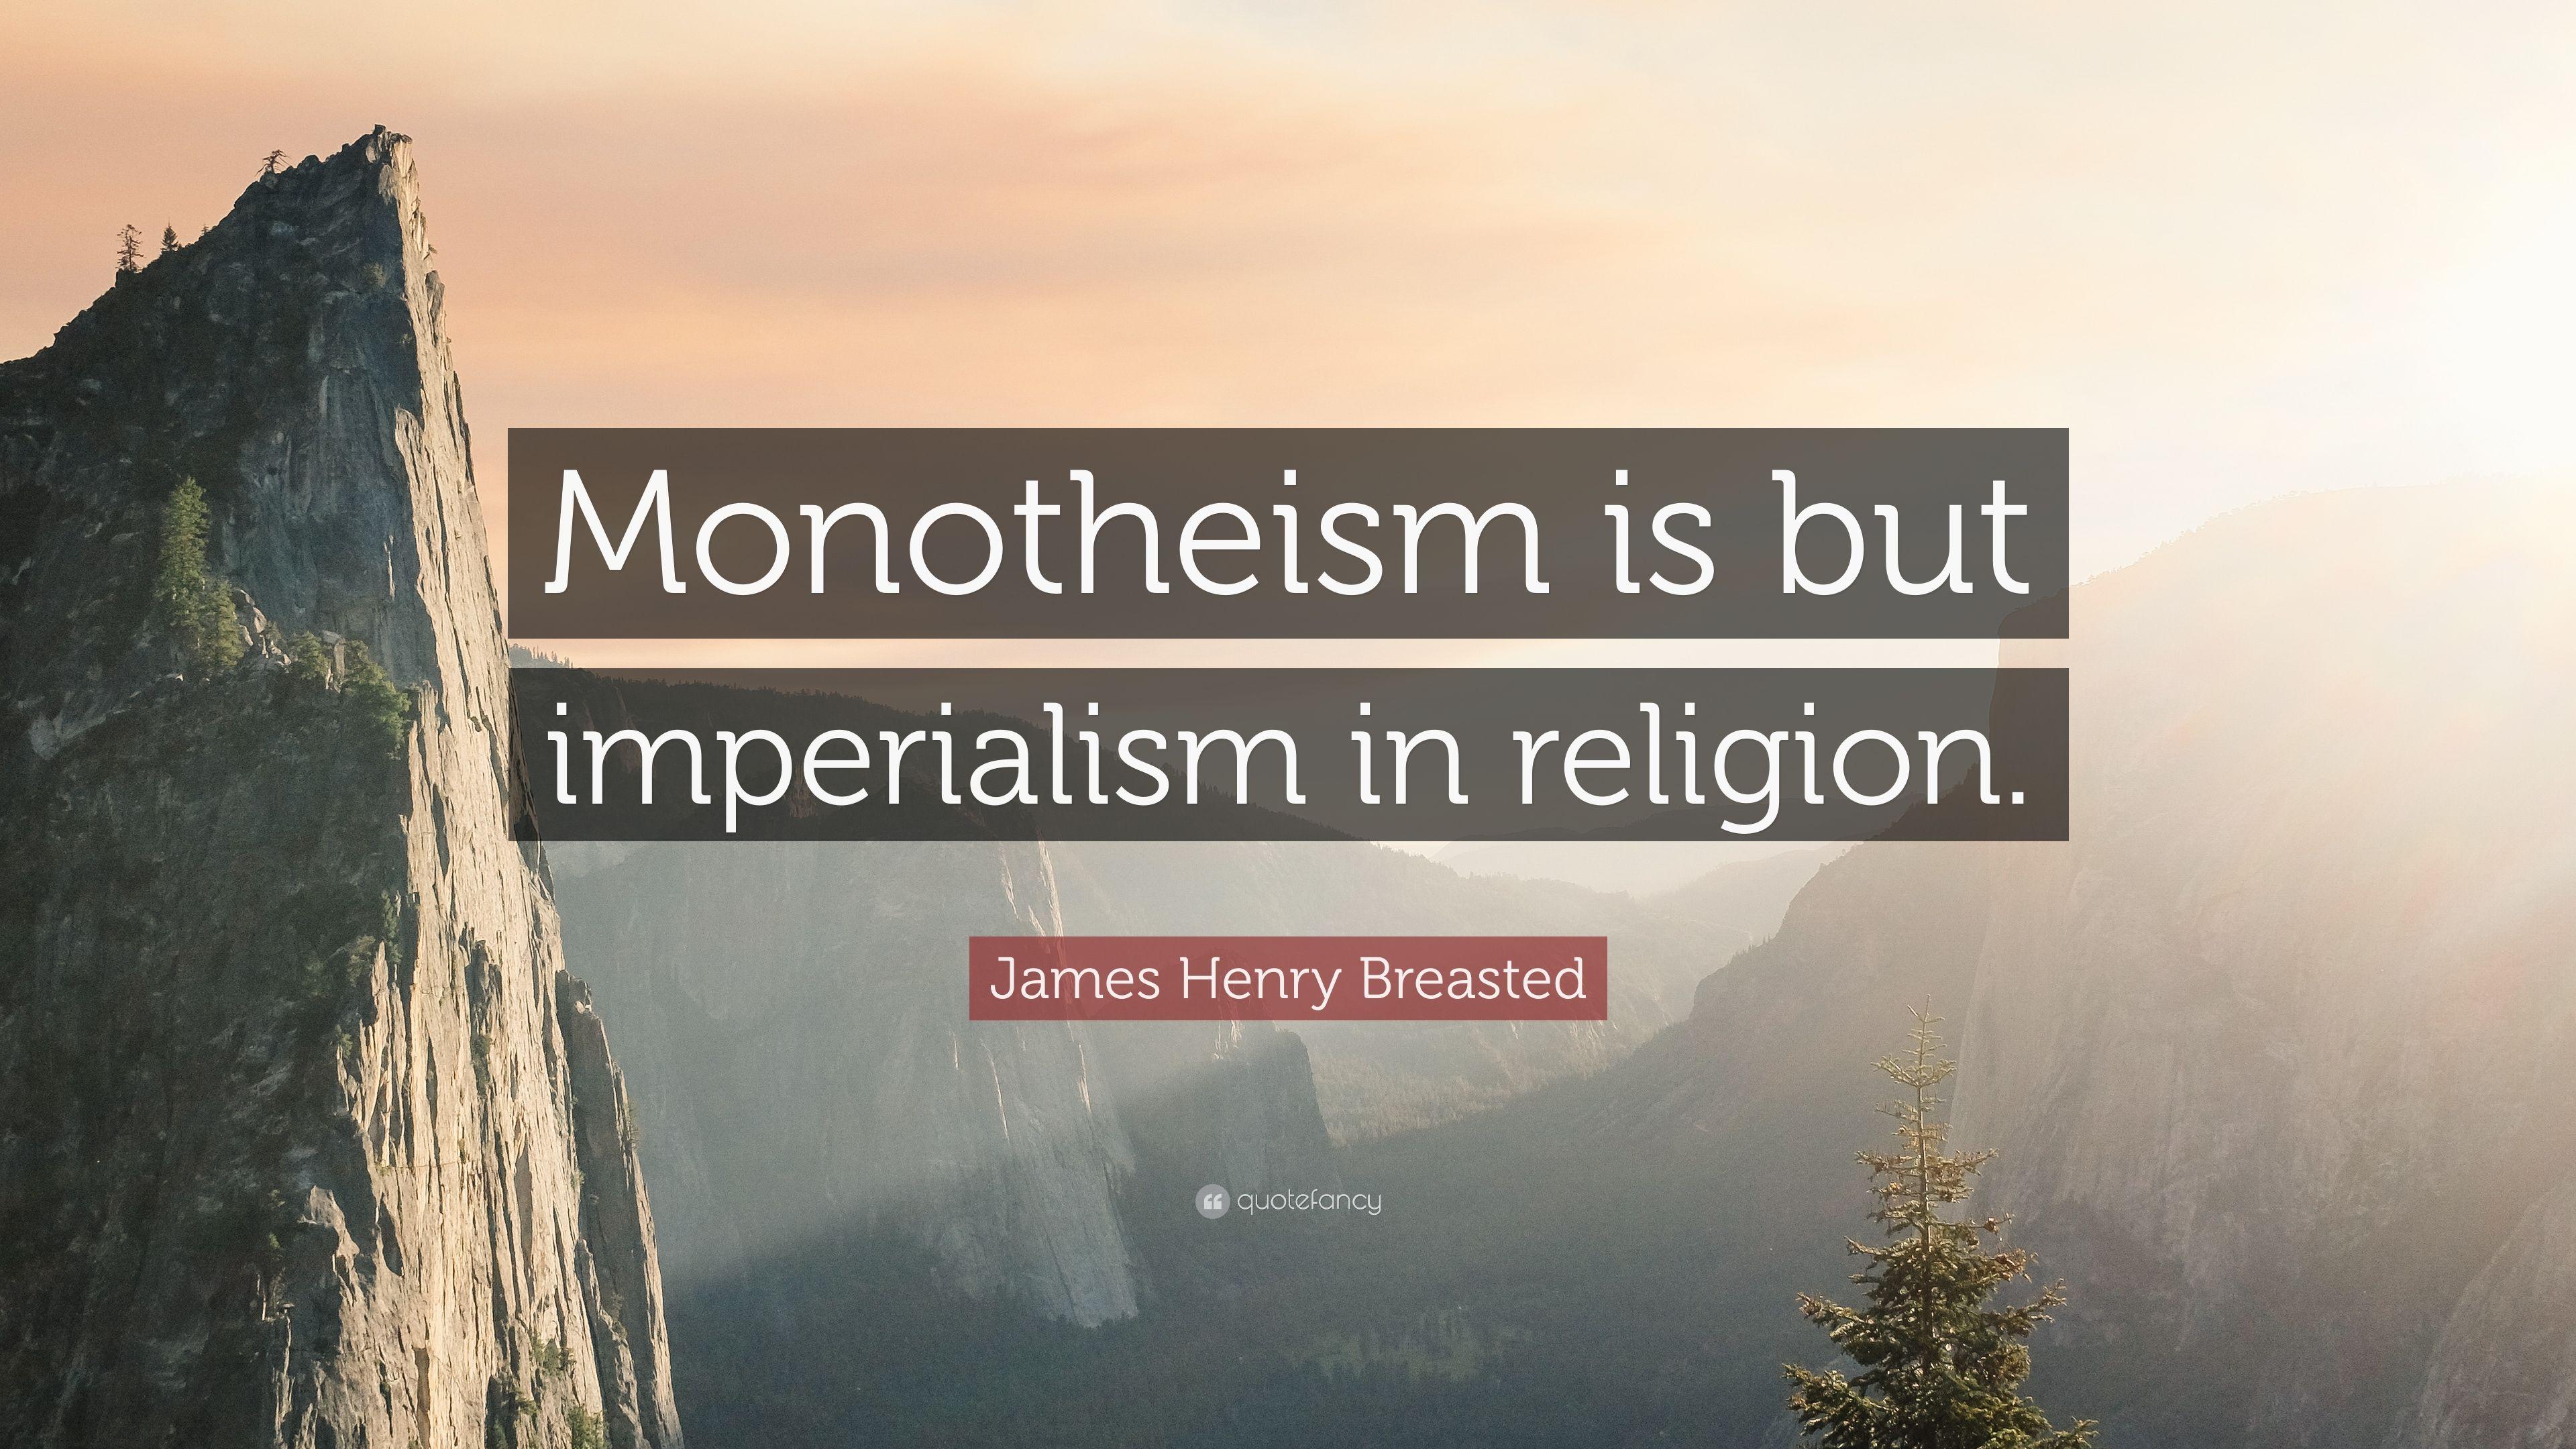 James Henry Breasted Quote: “Monotheism is but imperialism